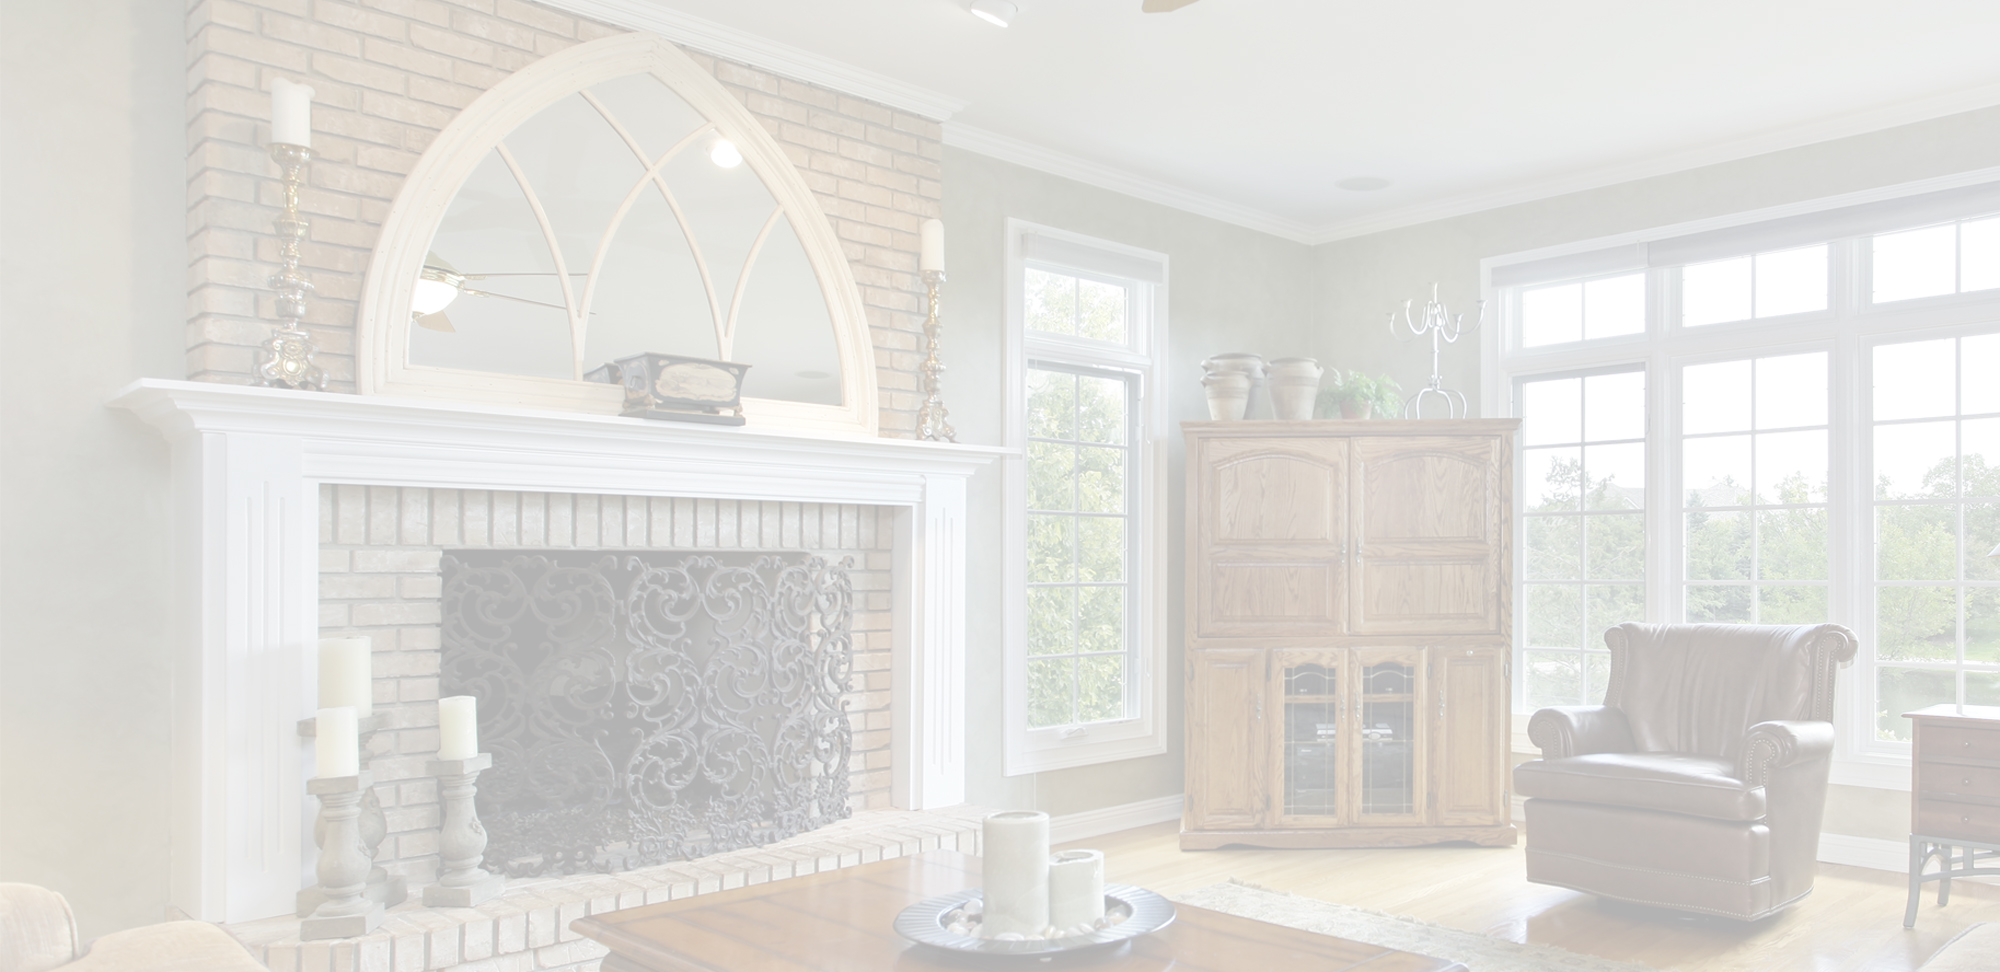 5 Popular Styles To Paint Brick Fireplaces